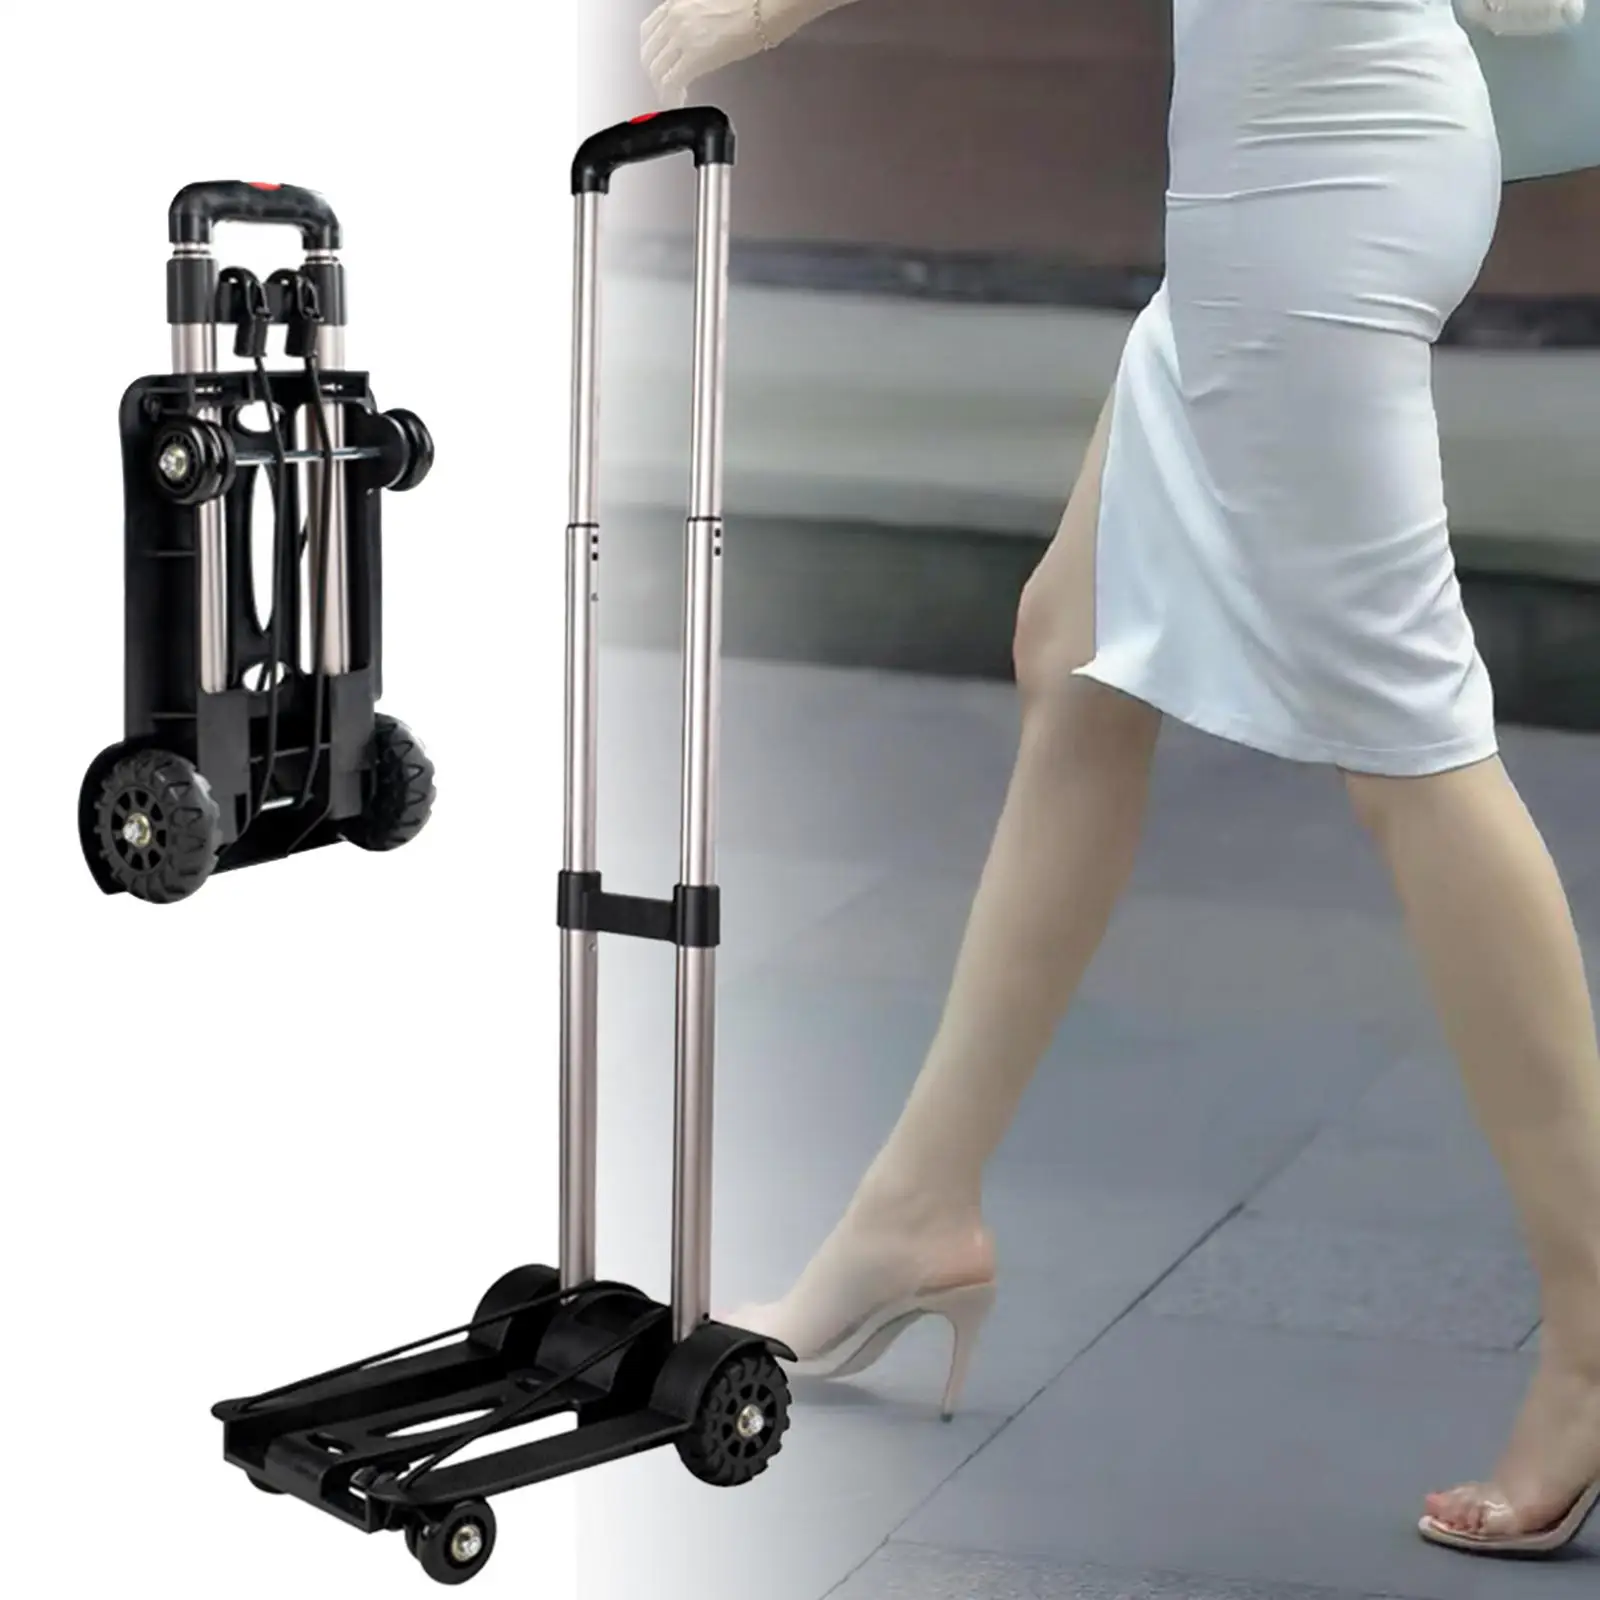 Folding Hand Truck Folding Hand Cart Aluminum Alloy Moving Luggage Cart Stair Climbing Hand Trucks for Household Delivering